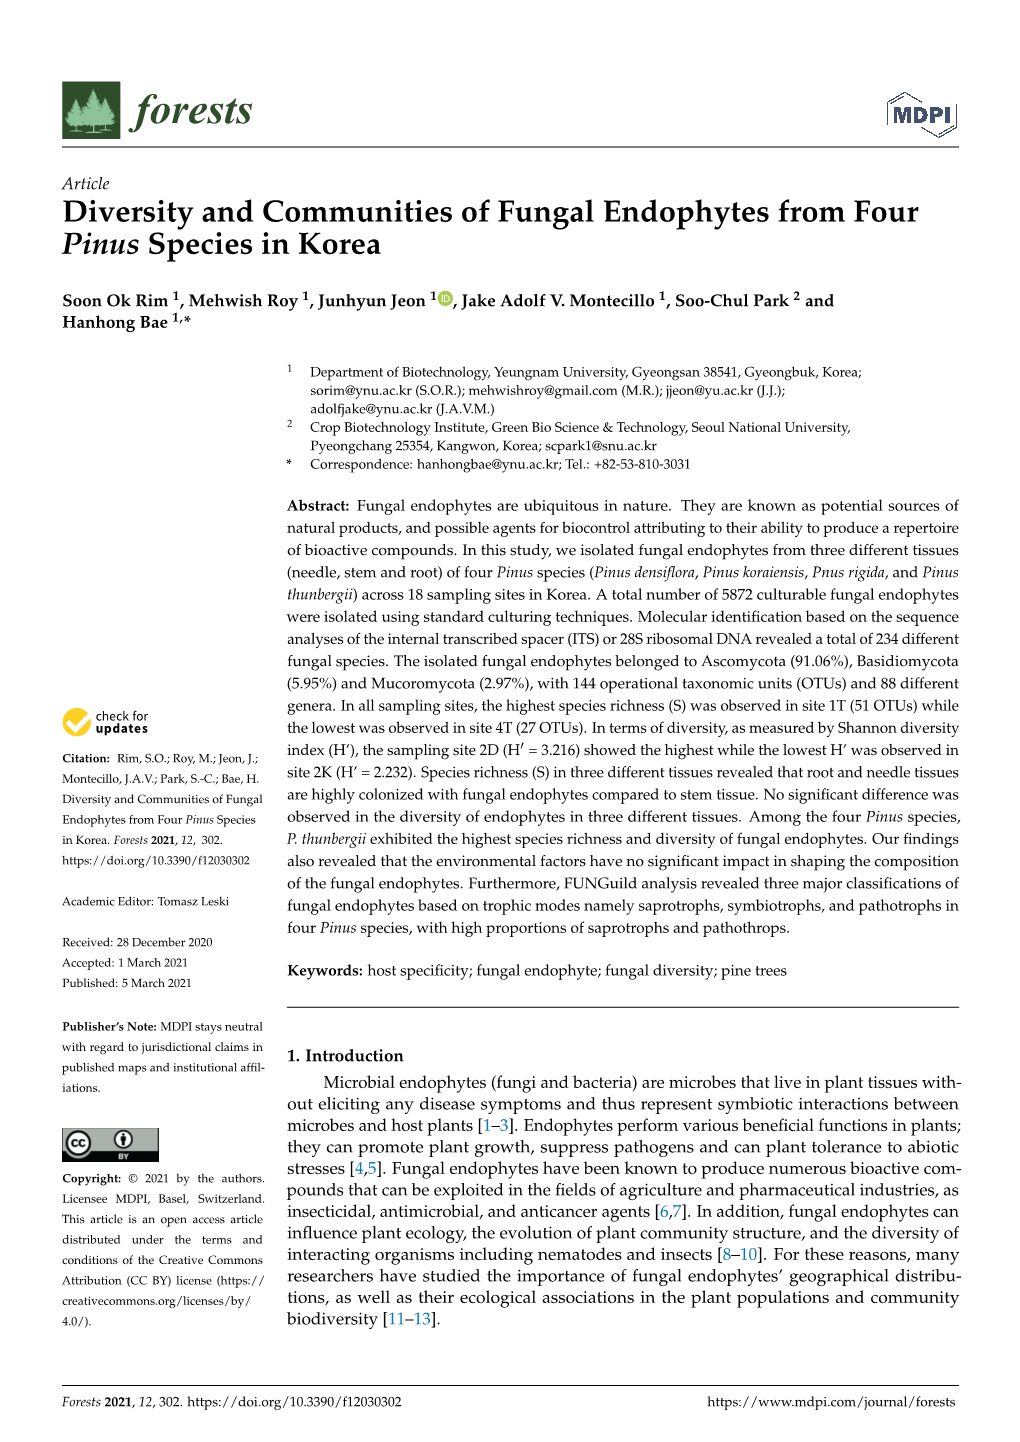 Diversity and Communities of Fungal Endophytes from Four Pinus Species in Korea